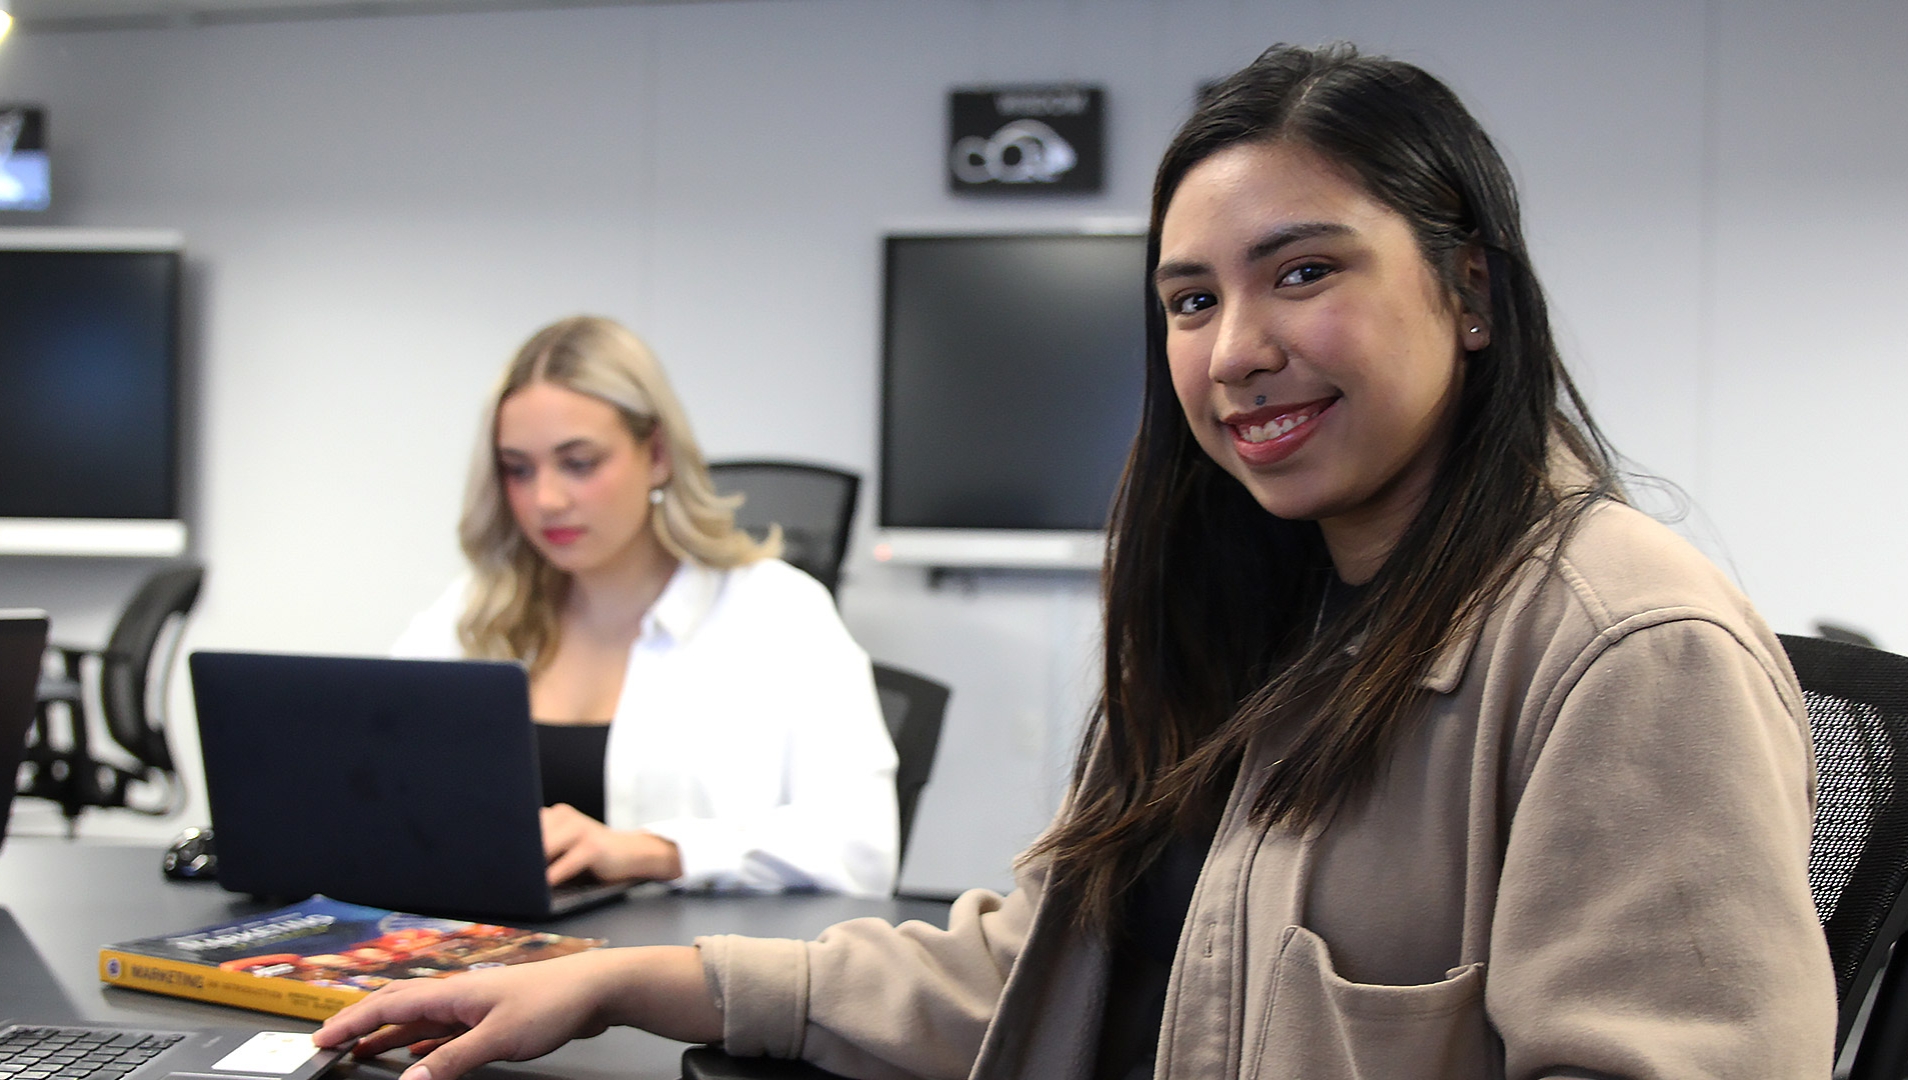 On the right side of the picture there's a female indigenous student sitting at a desk in the Westoba Lab room with a laptop and a textbook, smiling at the camera. In the background, on the left side of the picture another female student is using a laptop.